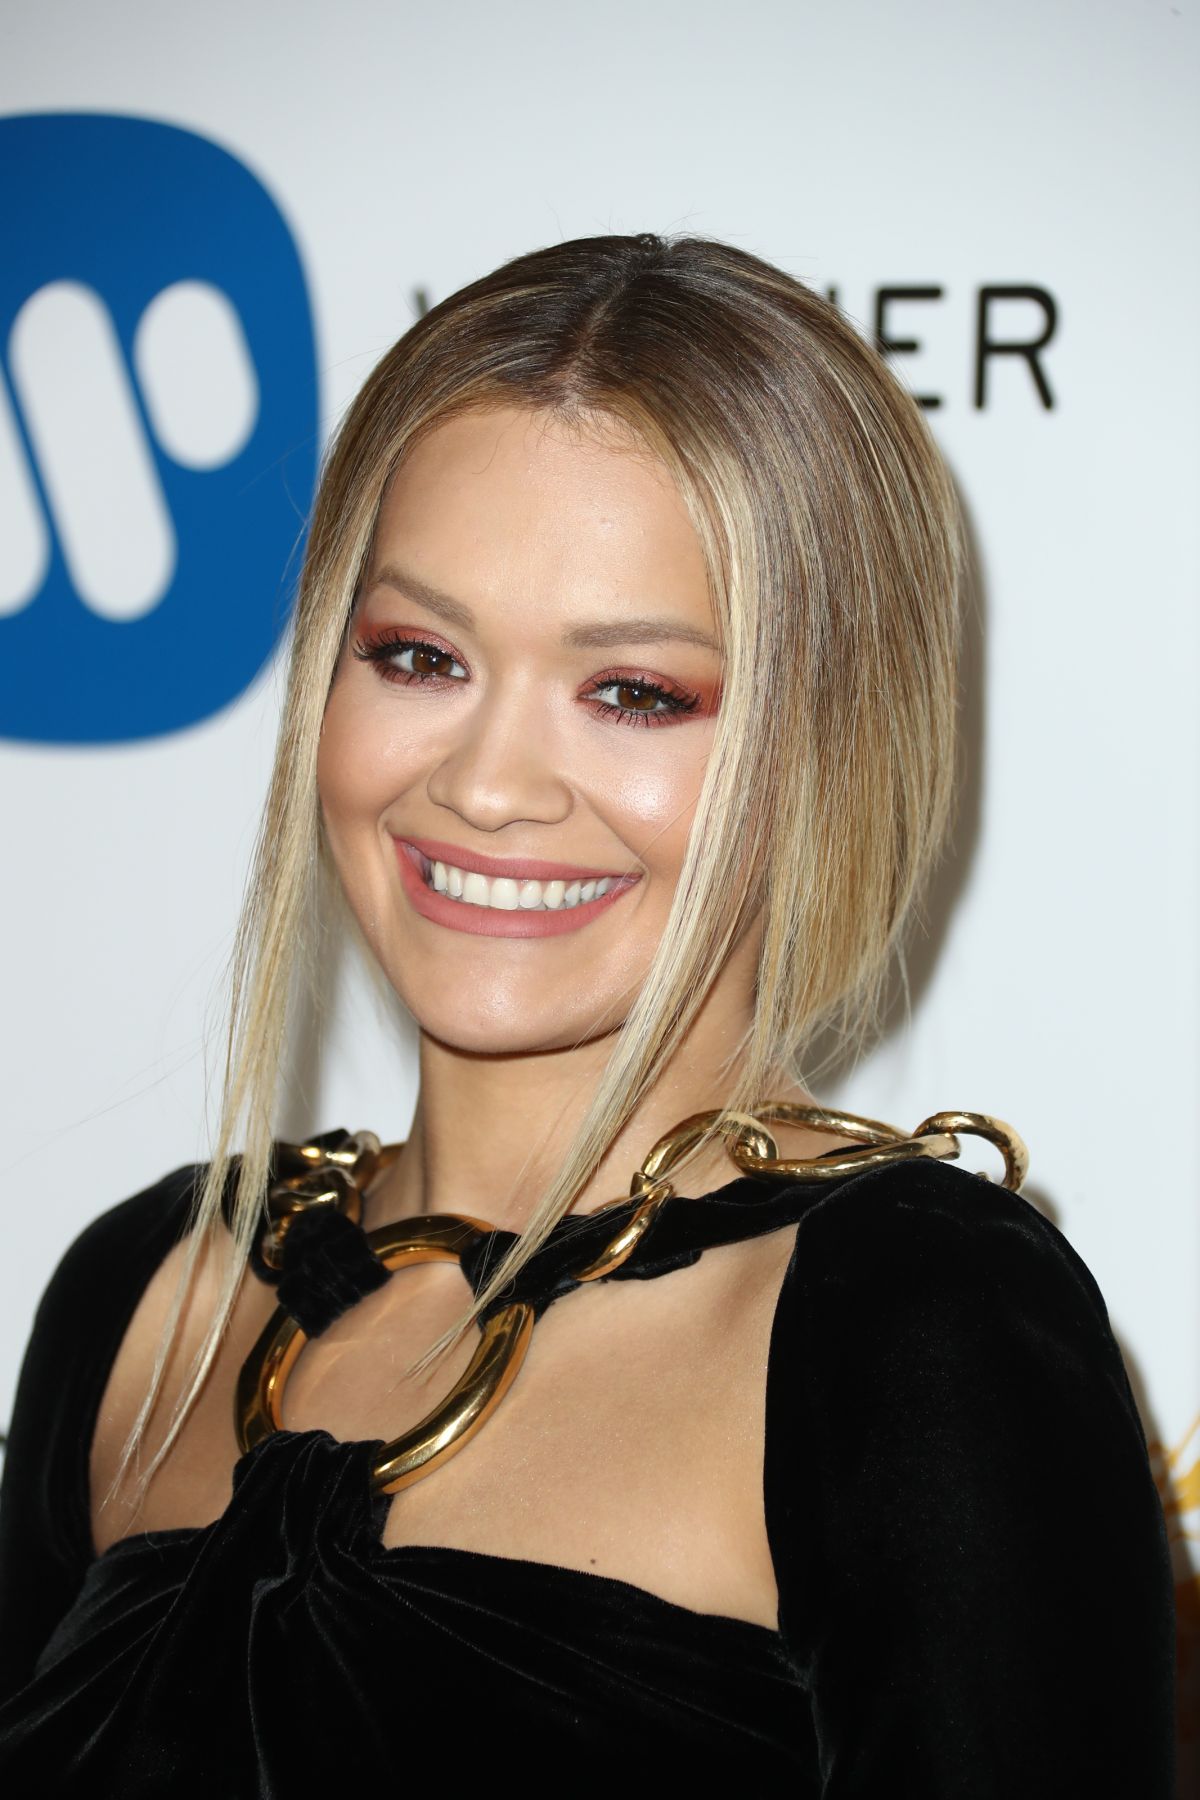 RITA ORA at Warner Music Group Grammy After Party in Los Angeles 02 12 